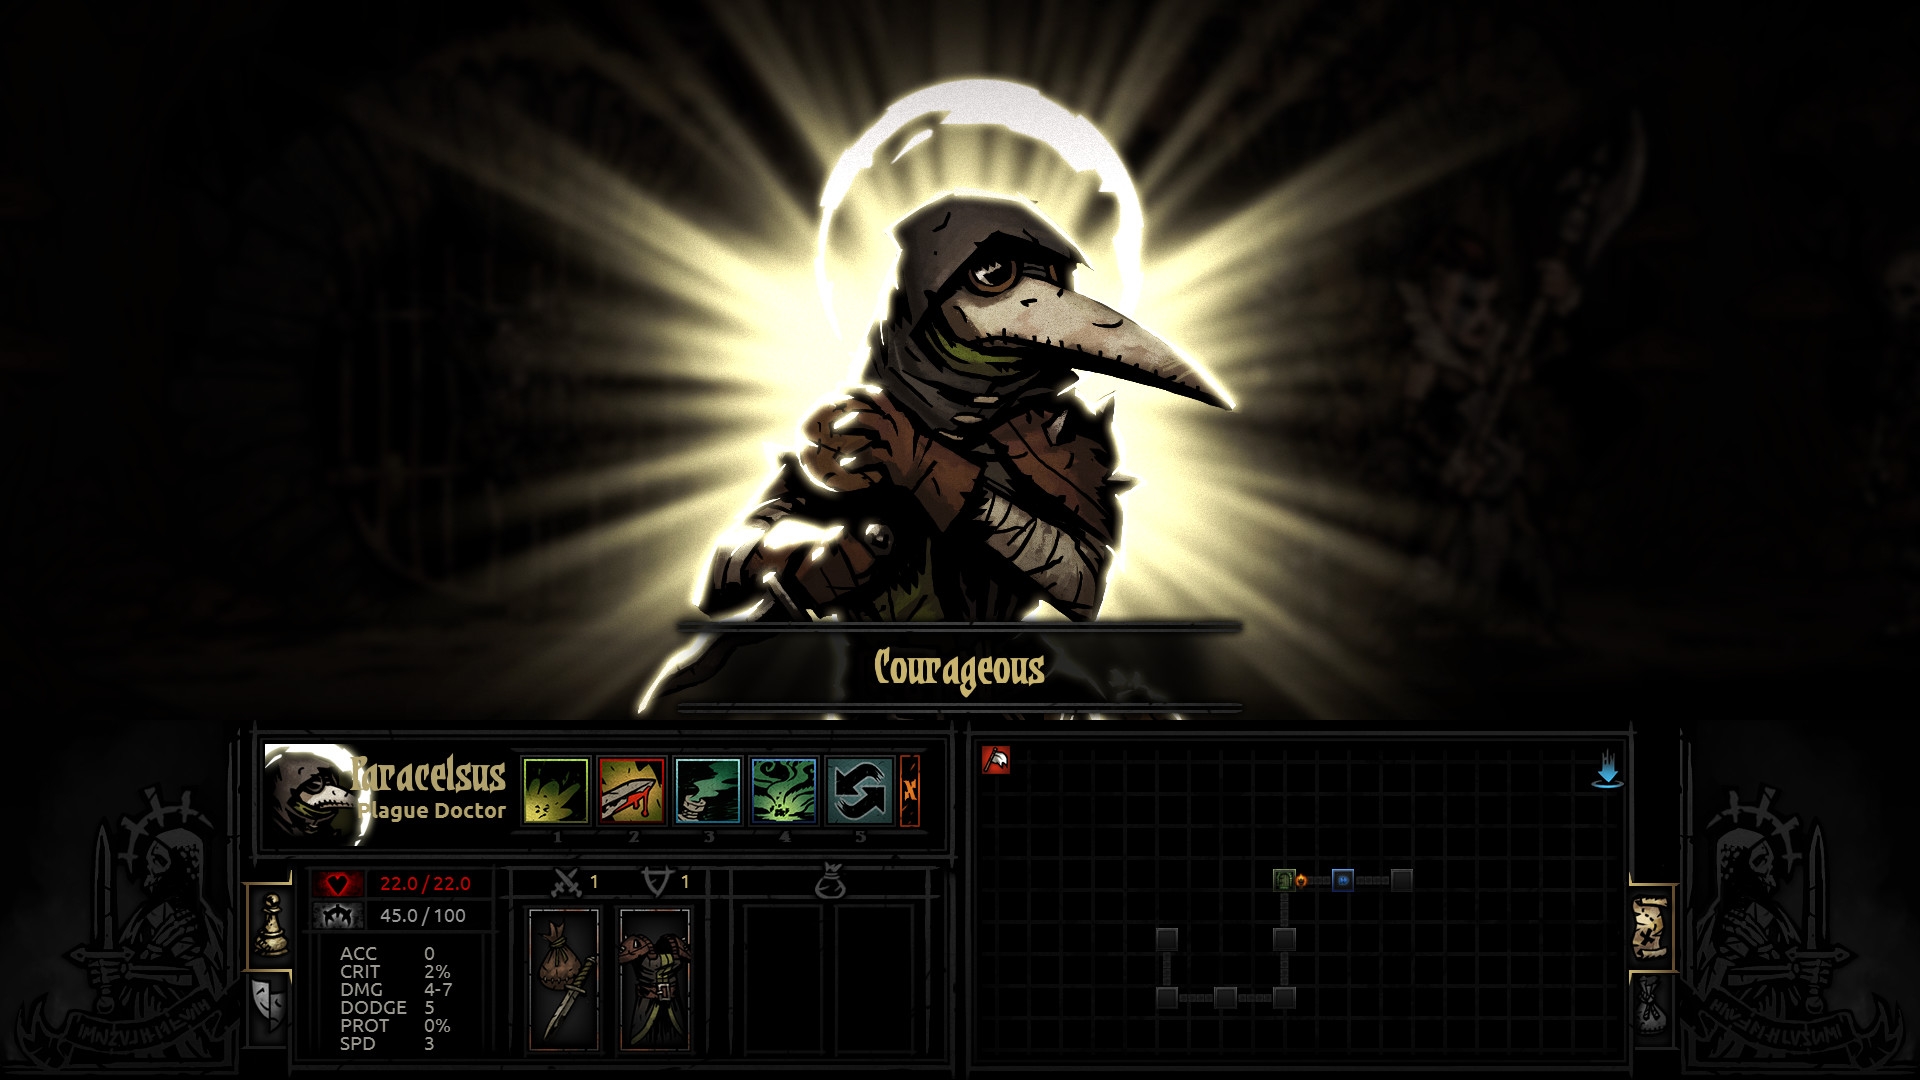 A plague doctor becomes courageous 